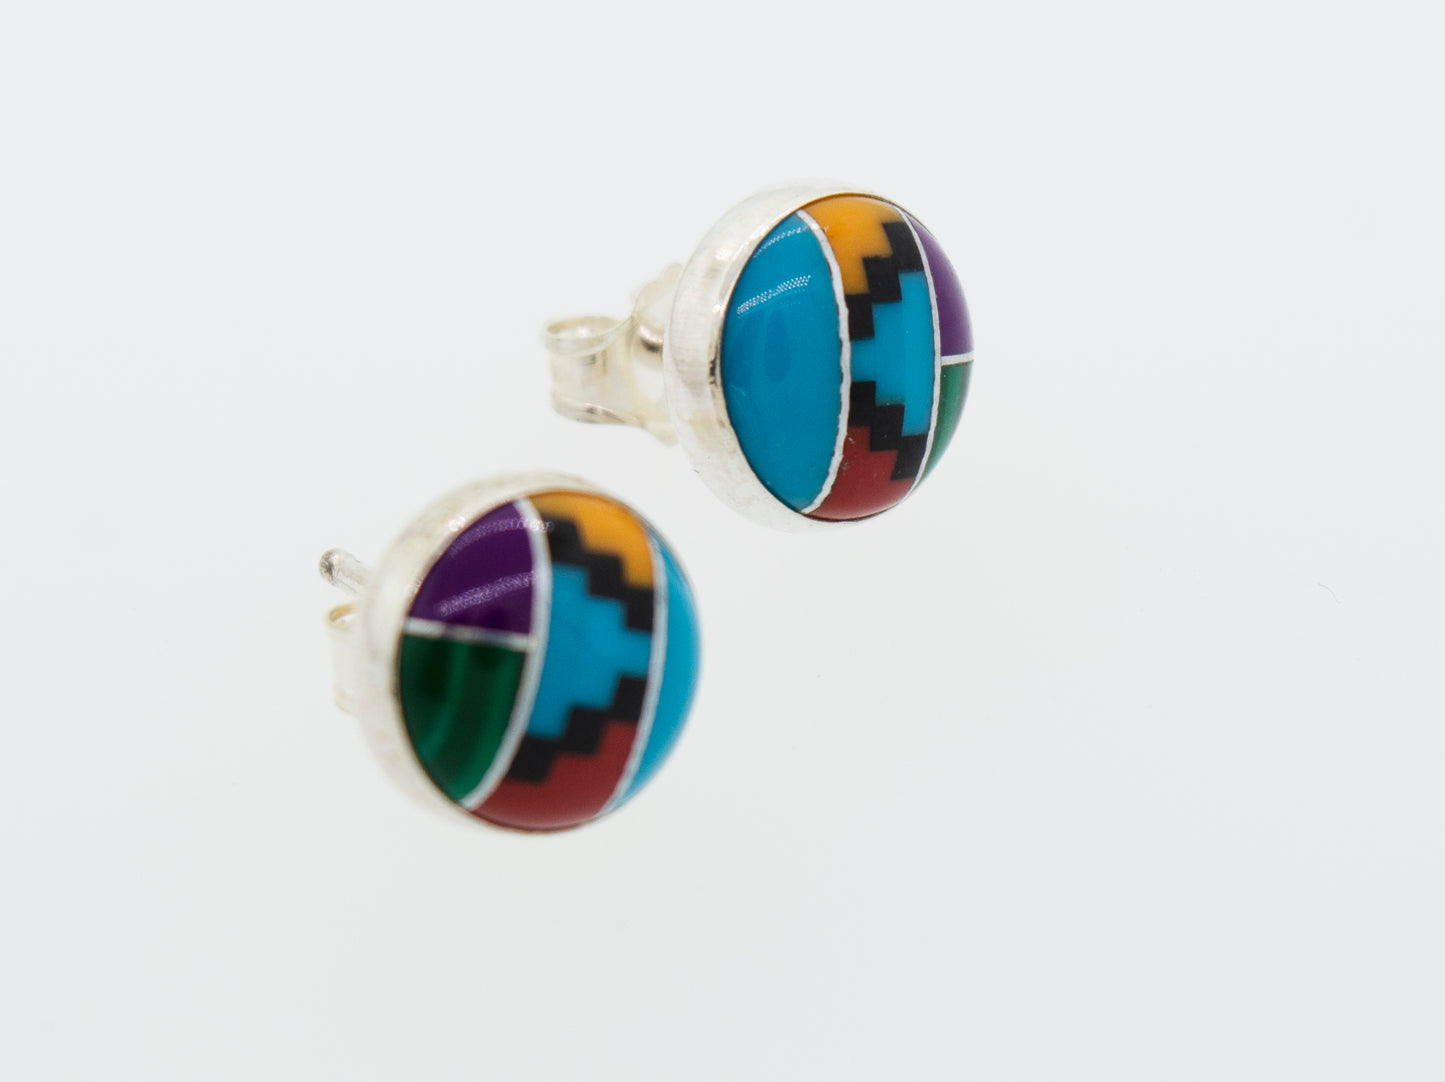 A pair of vibrant Super Silver Multi-Stone Round Stud Earrings on a white background featuring an American made, sterling silver frame.